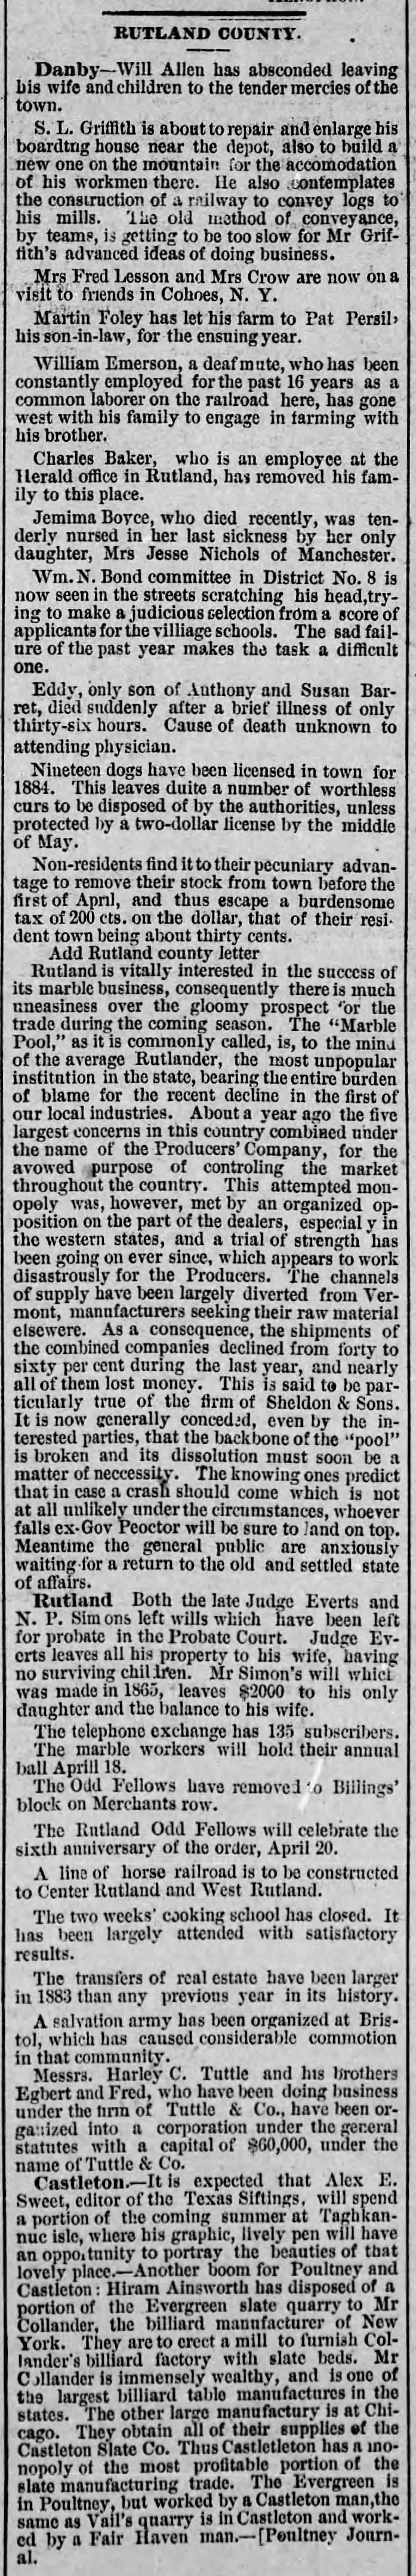 News from Rutland County, 1884